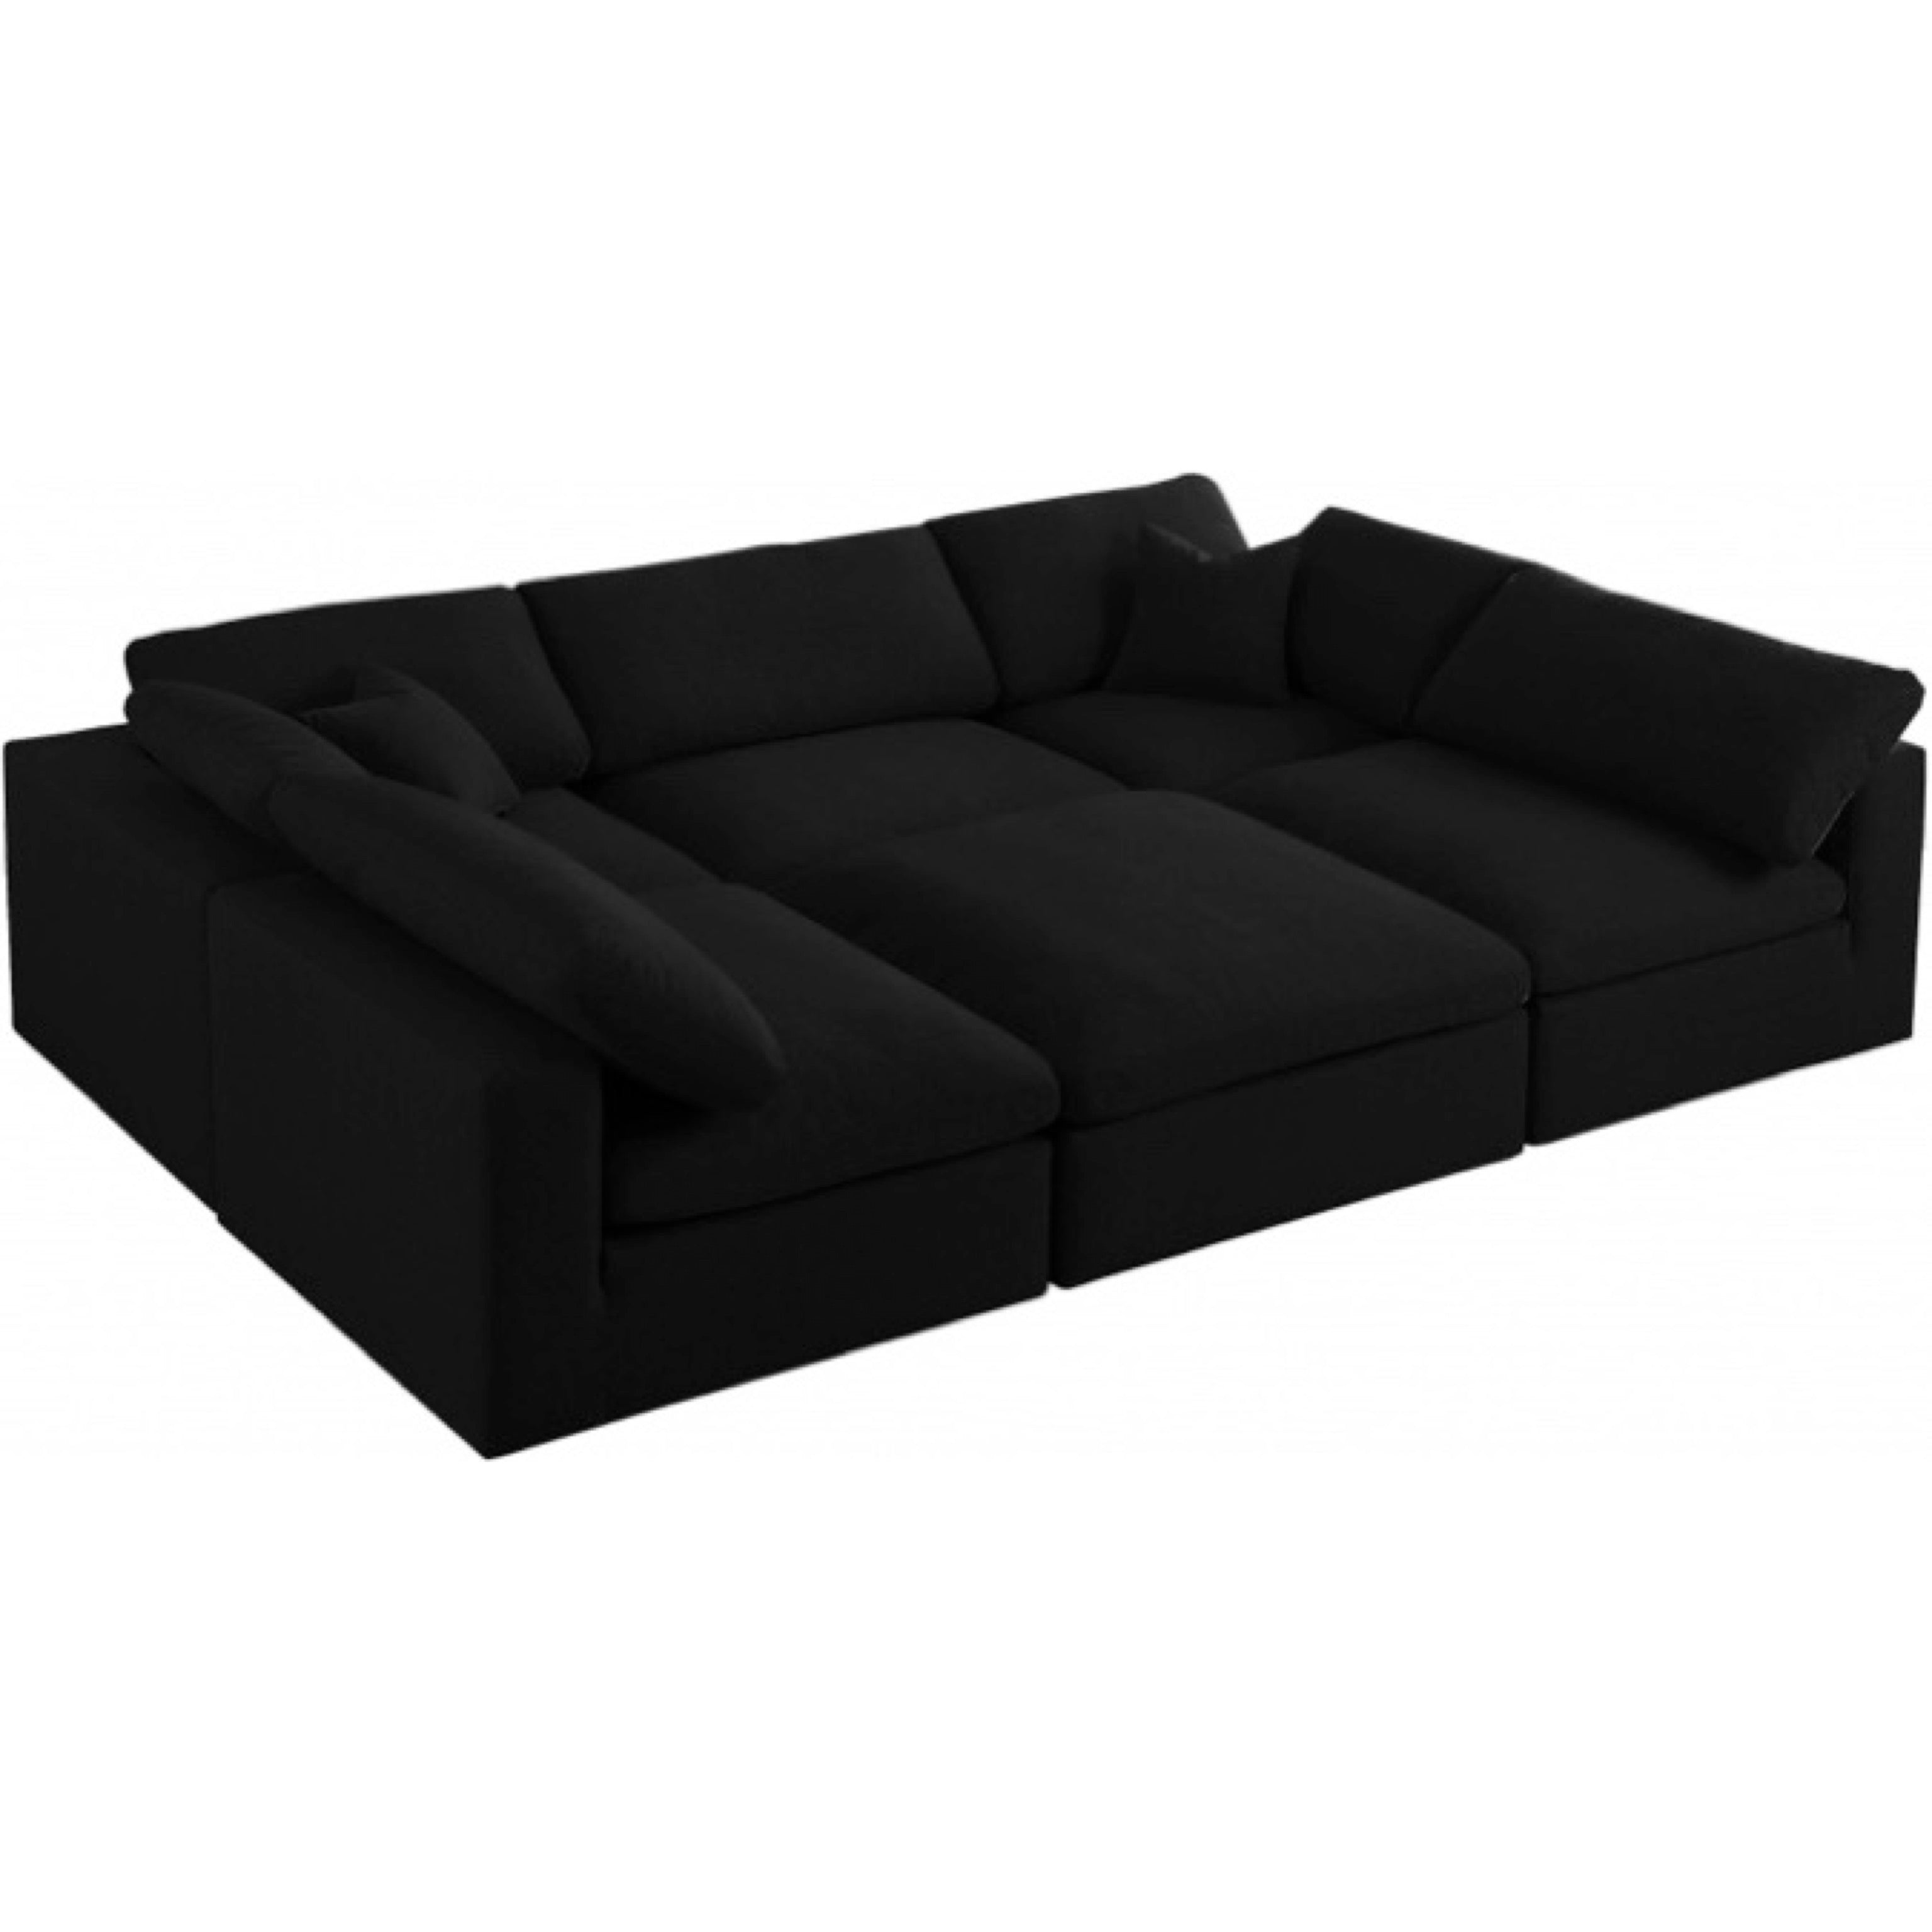 Sky Linen Deluxe Plush Modular 6 Piece Pit Sectional